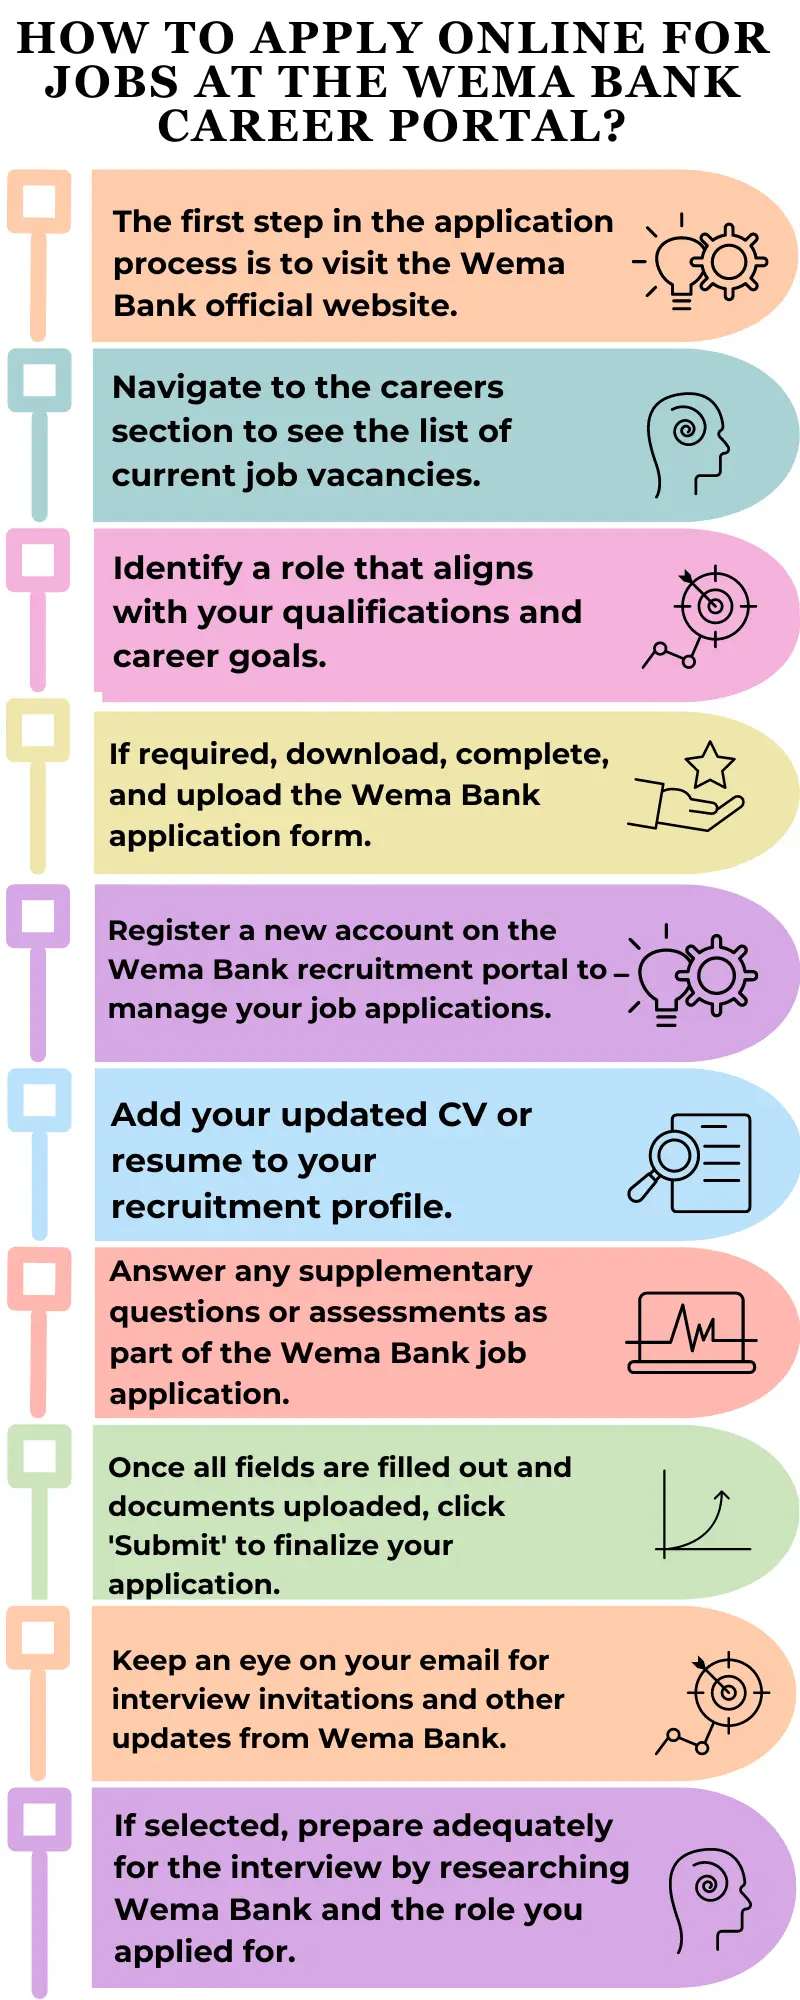 How to Apply Online for Jobs at the Wema Bank Career Portal?